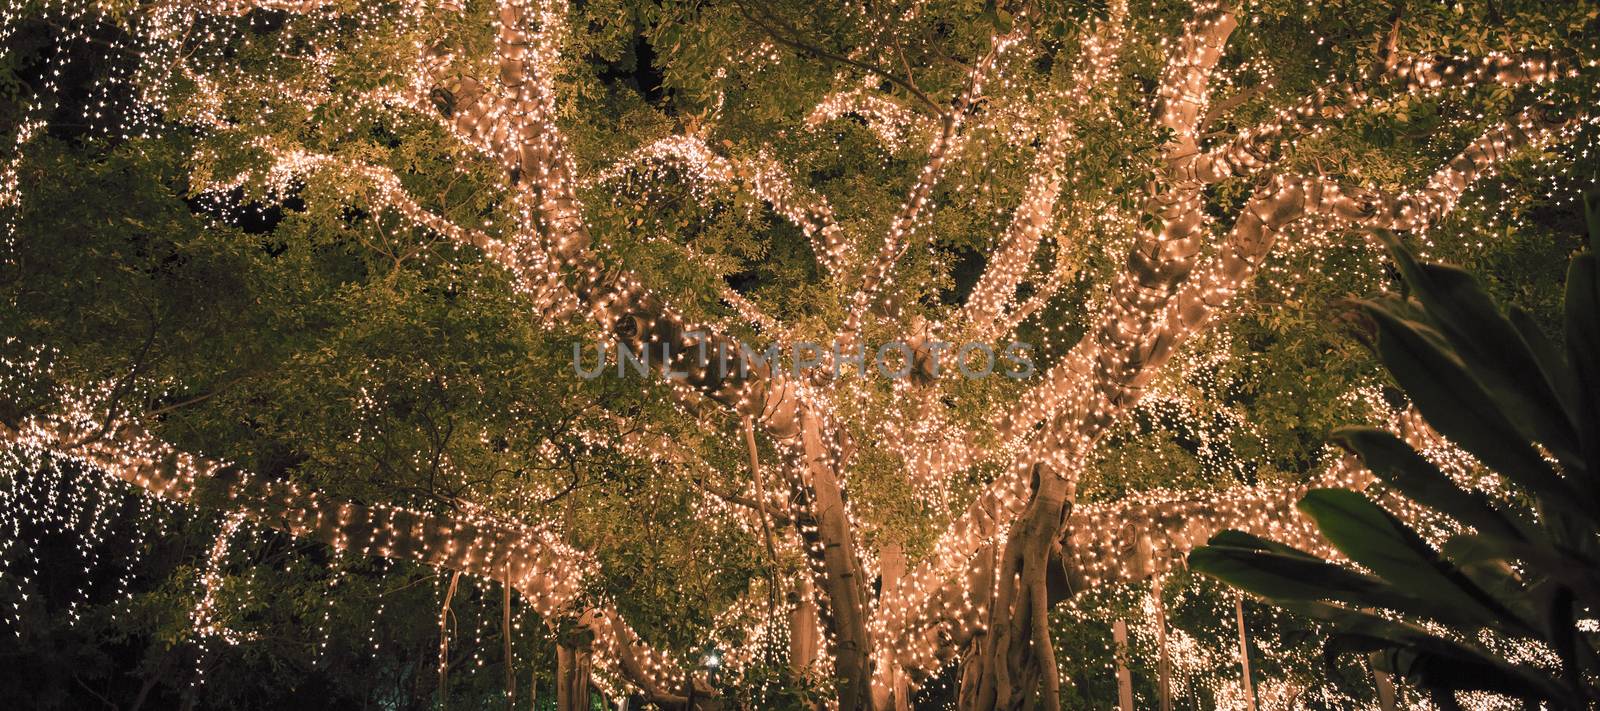 Beautiful tree located in Brisbane City covered in lights. by artistrobd